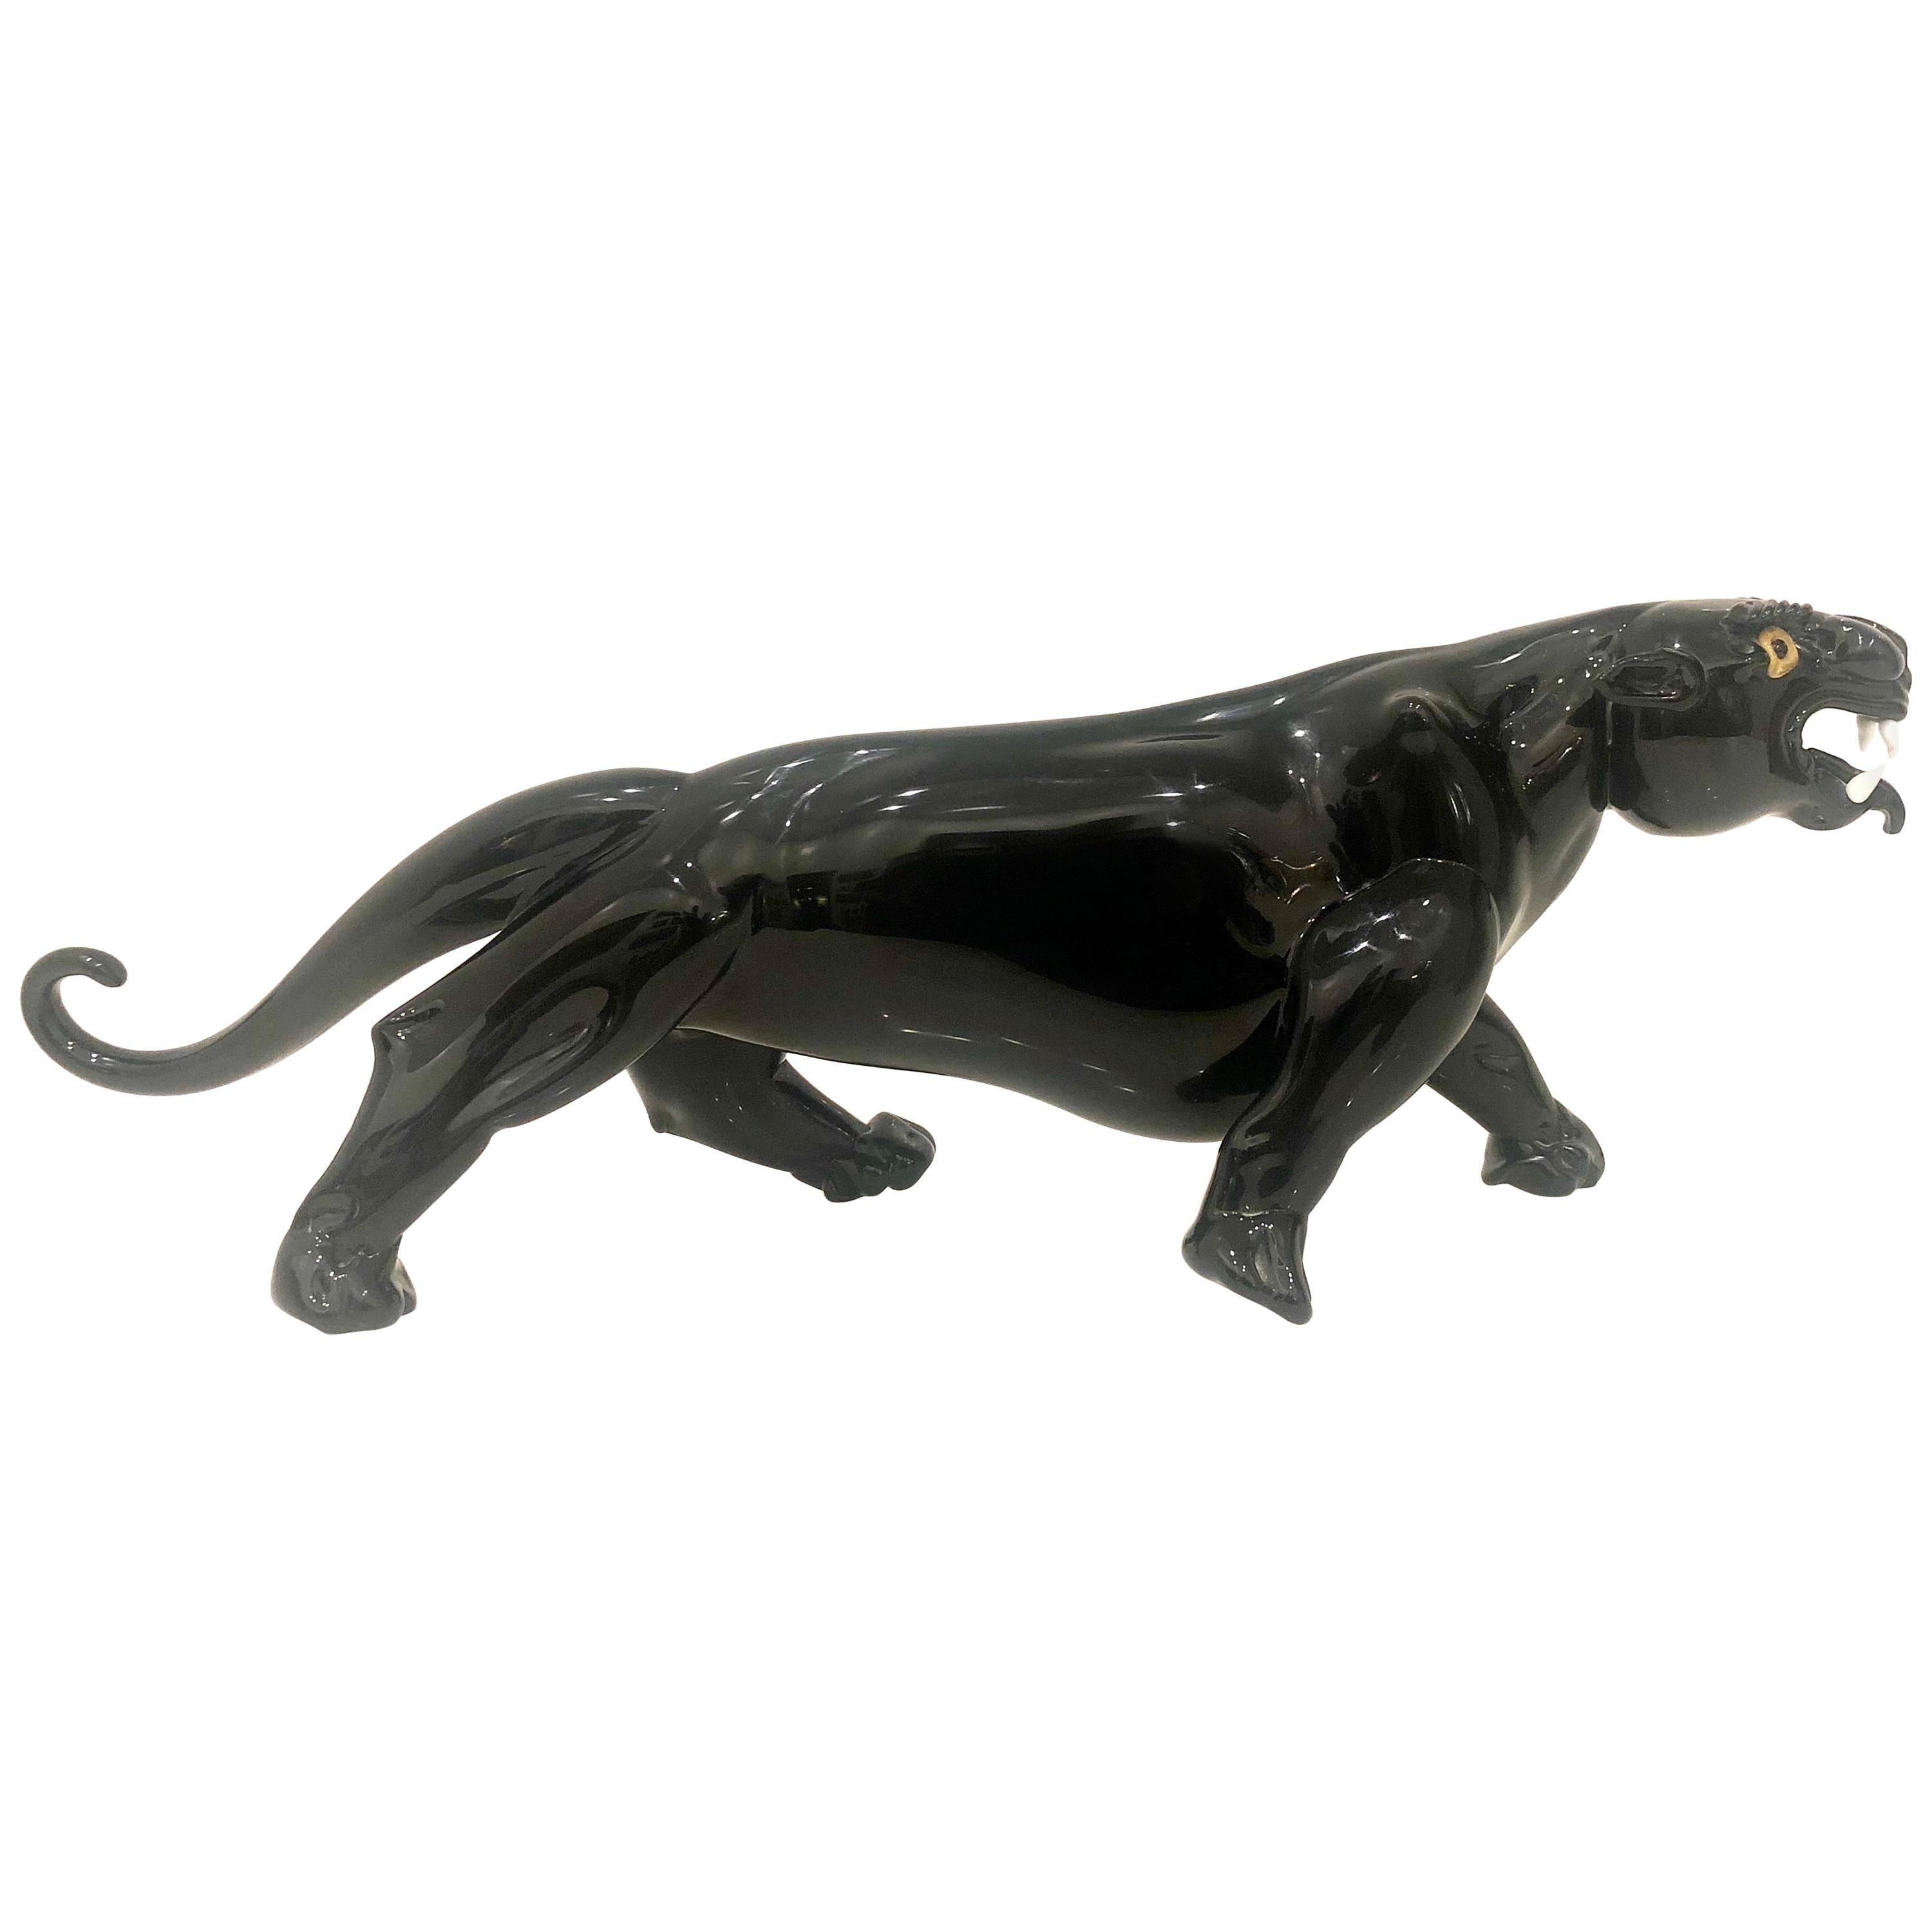 Striking Black Panther Murano Glass Sculpture Attributed to Romano Dona